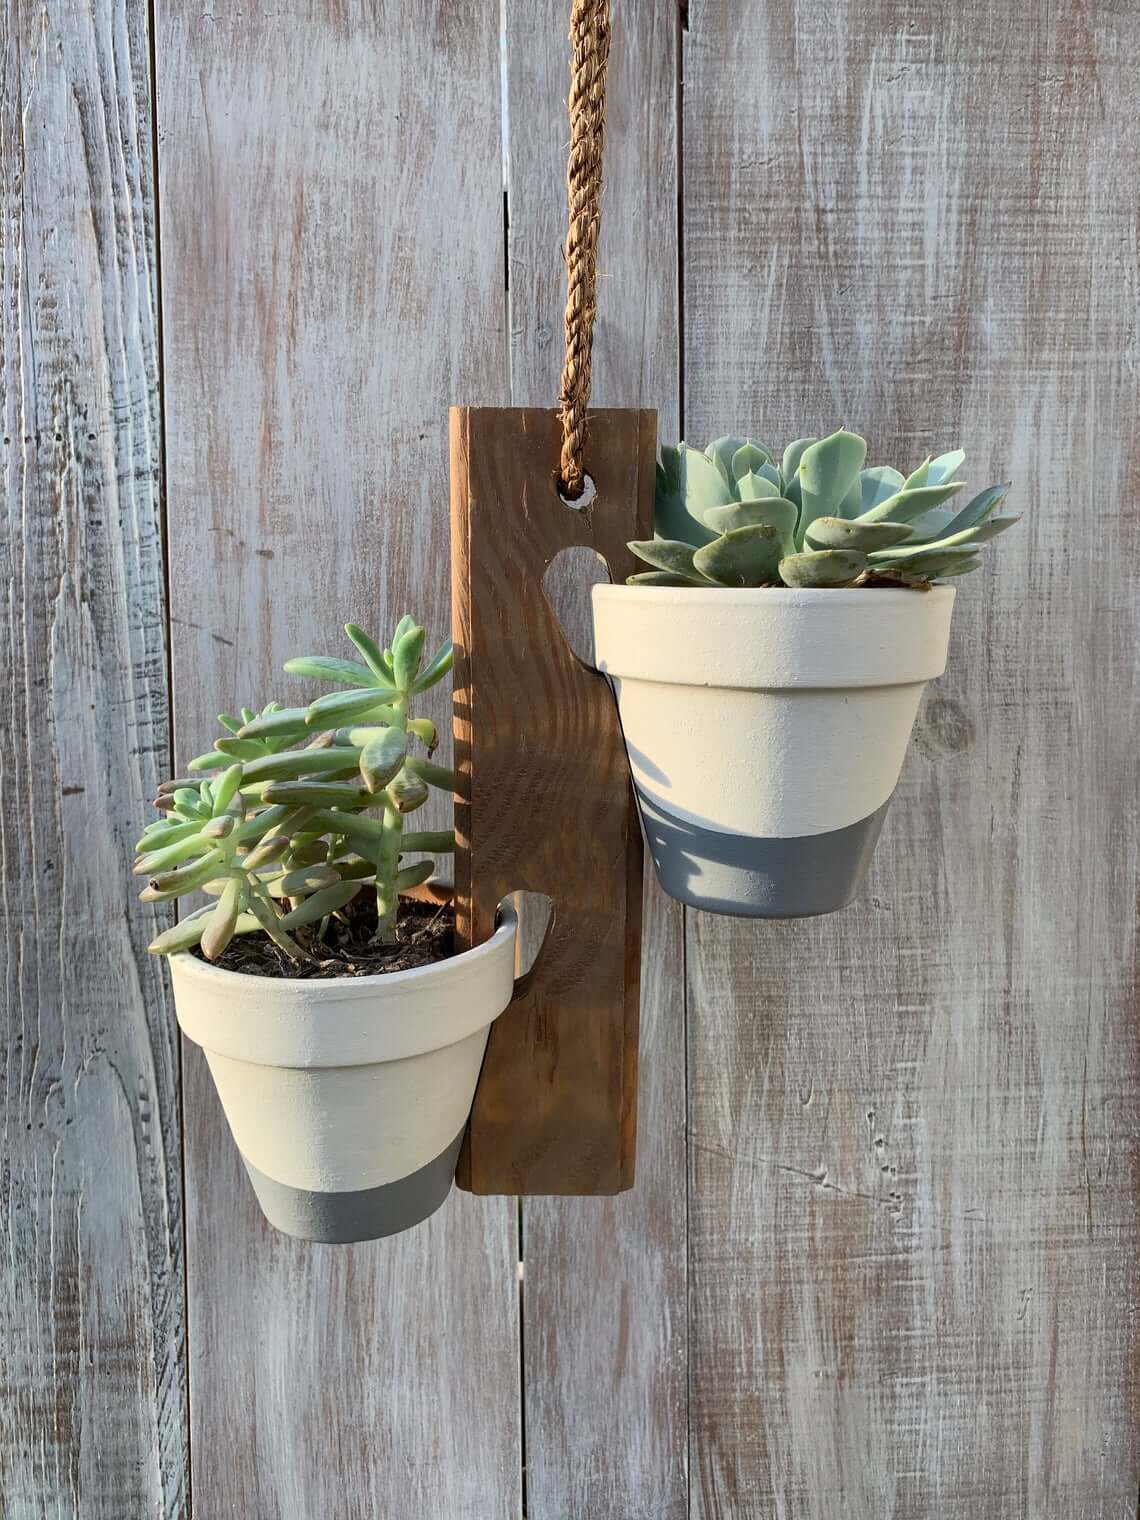 Plant Holder-Home Decor Rustic Wood Wall Hanging Planter Triangle Pot 